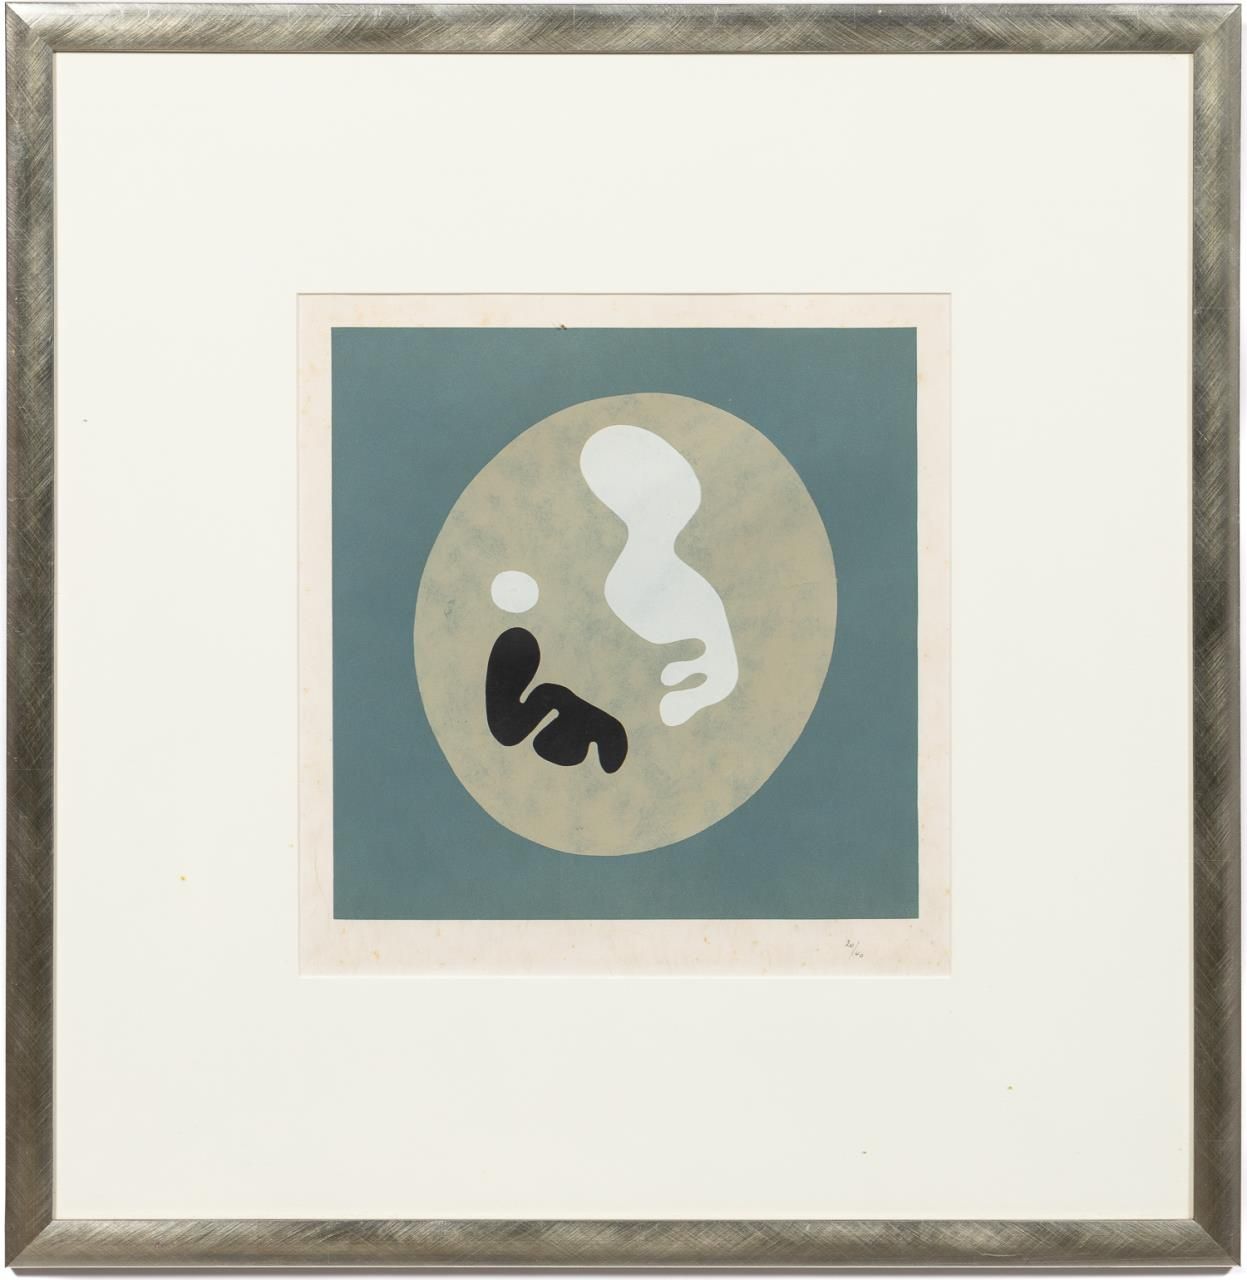 JEAN HANS ARP, UNTITLED COLORED